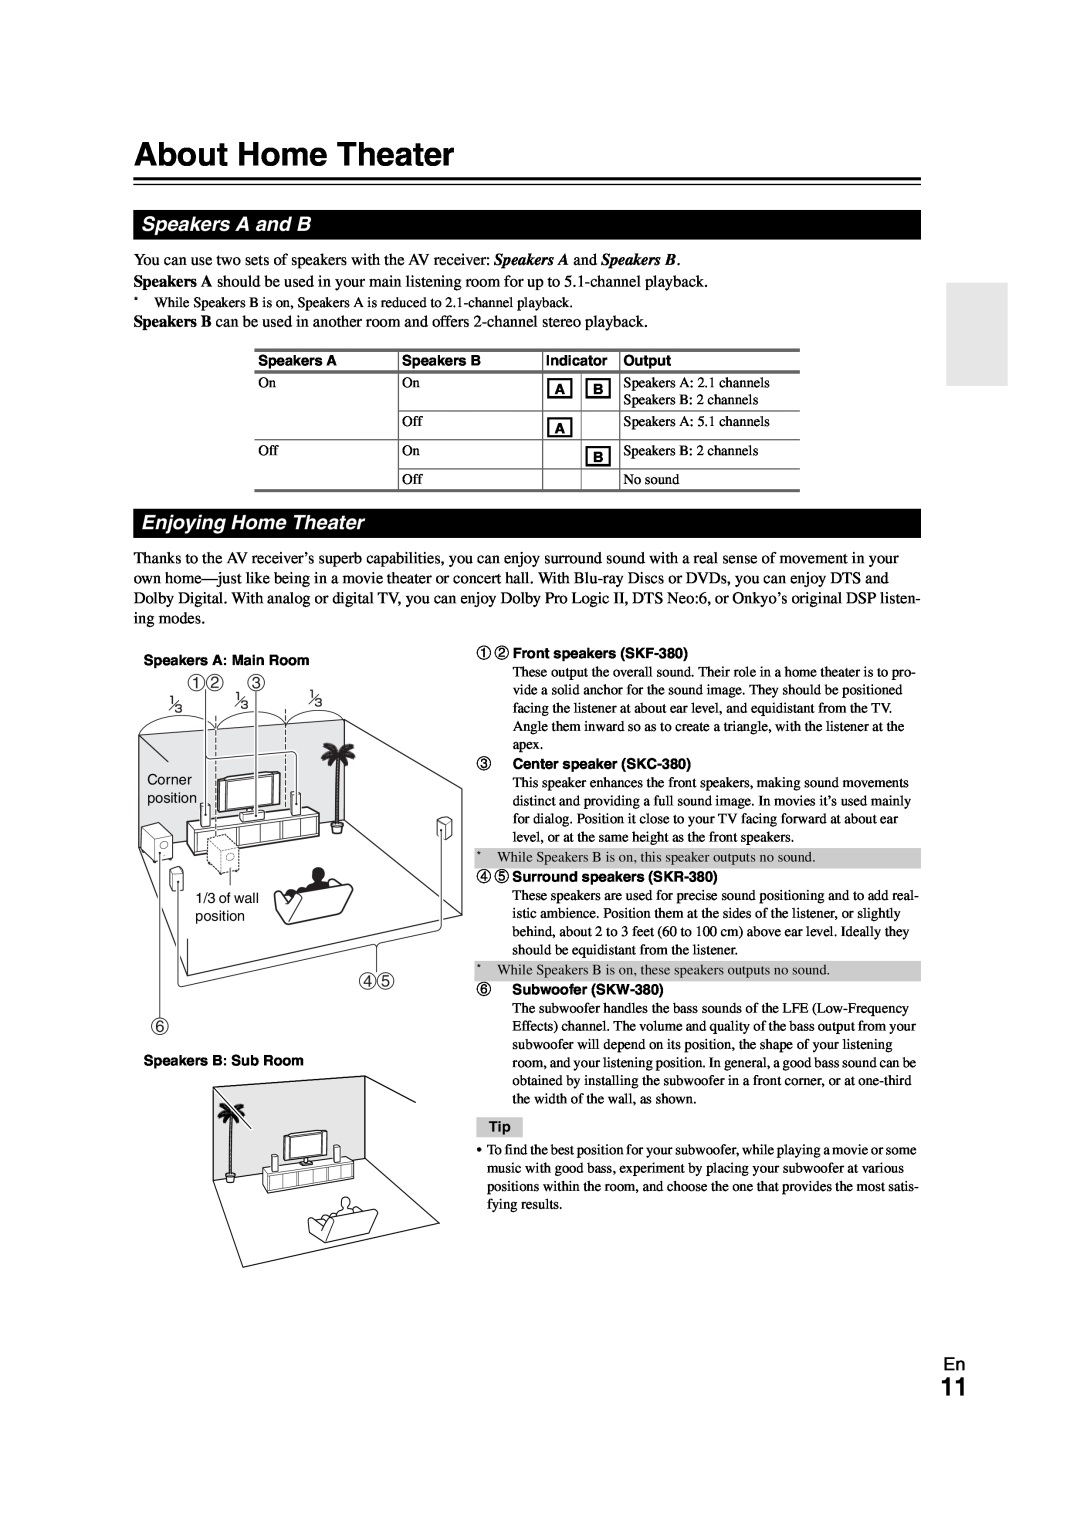 Onkyo AVX-280 instruction manual About Home Theater, Speakers A and B, Enjoying Home Theater, ab c, de f 